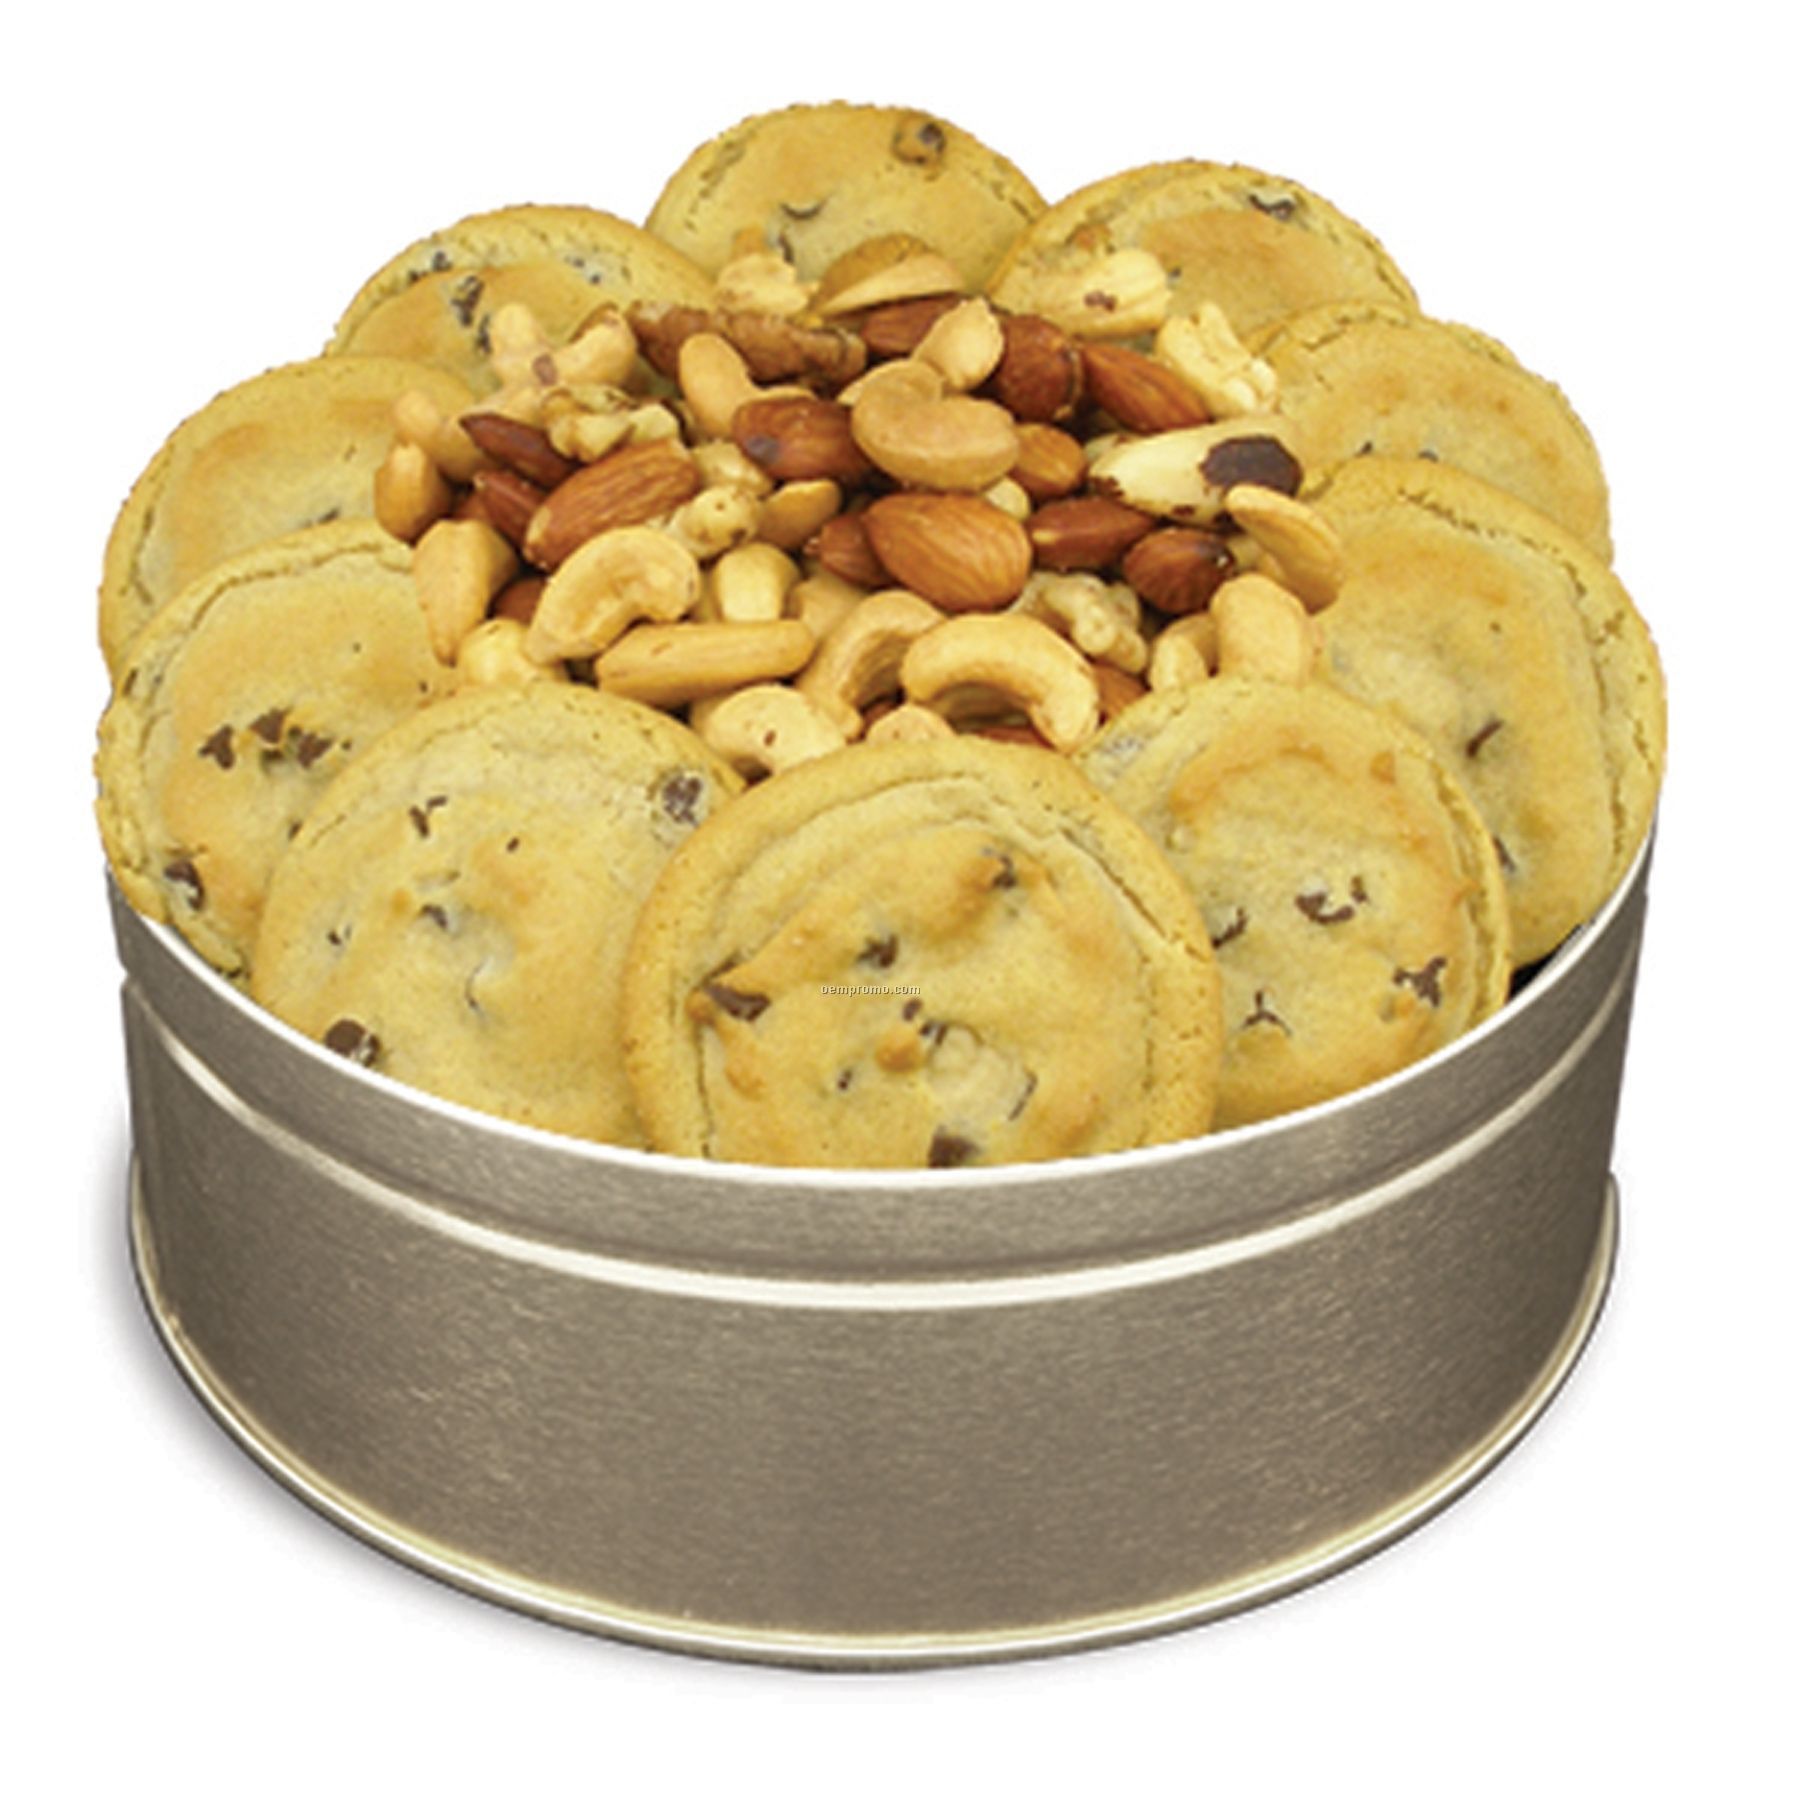 Cookie Nut Combos - 10 Chocolate Chip Cookies & Fancy Mixed Nuts (10 Oz.)